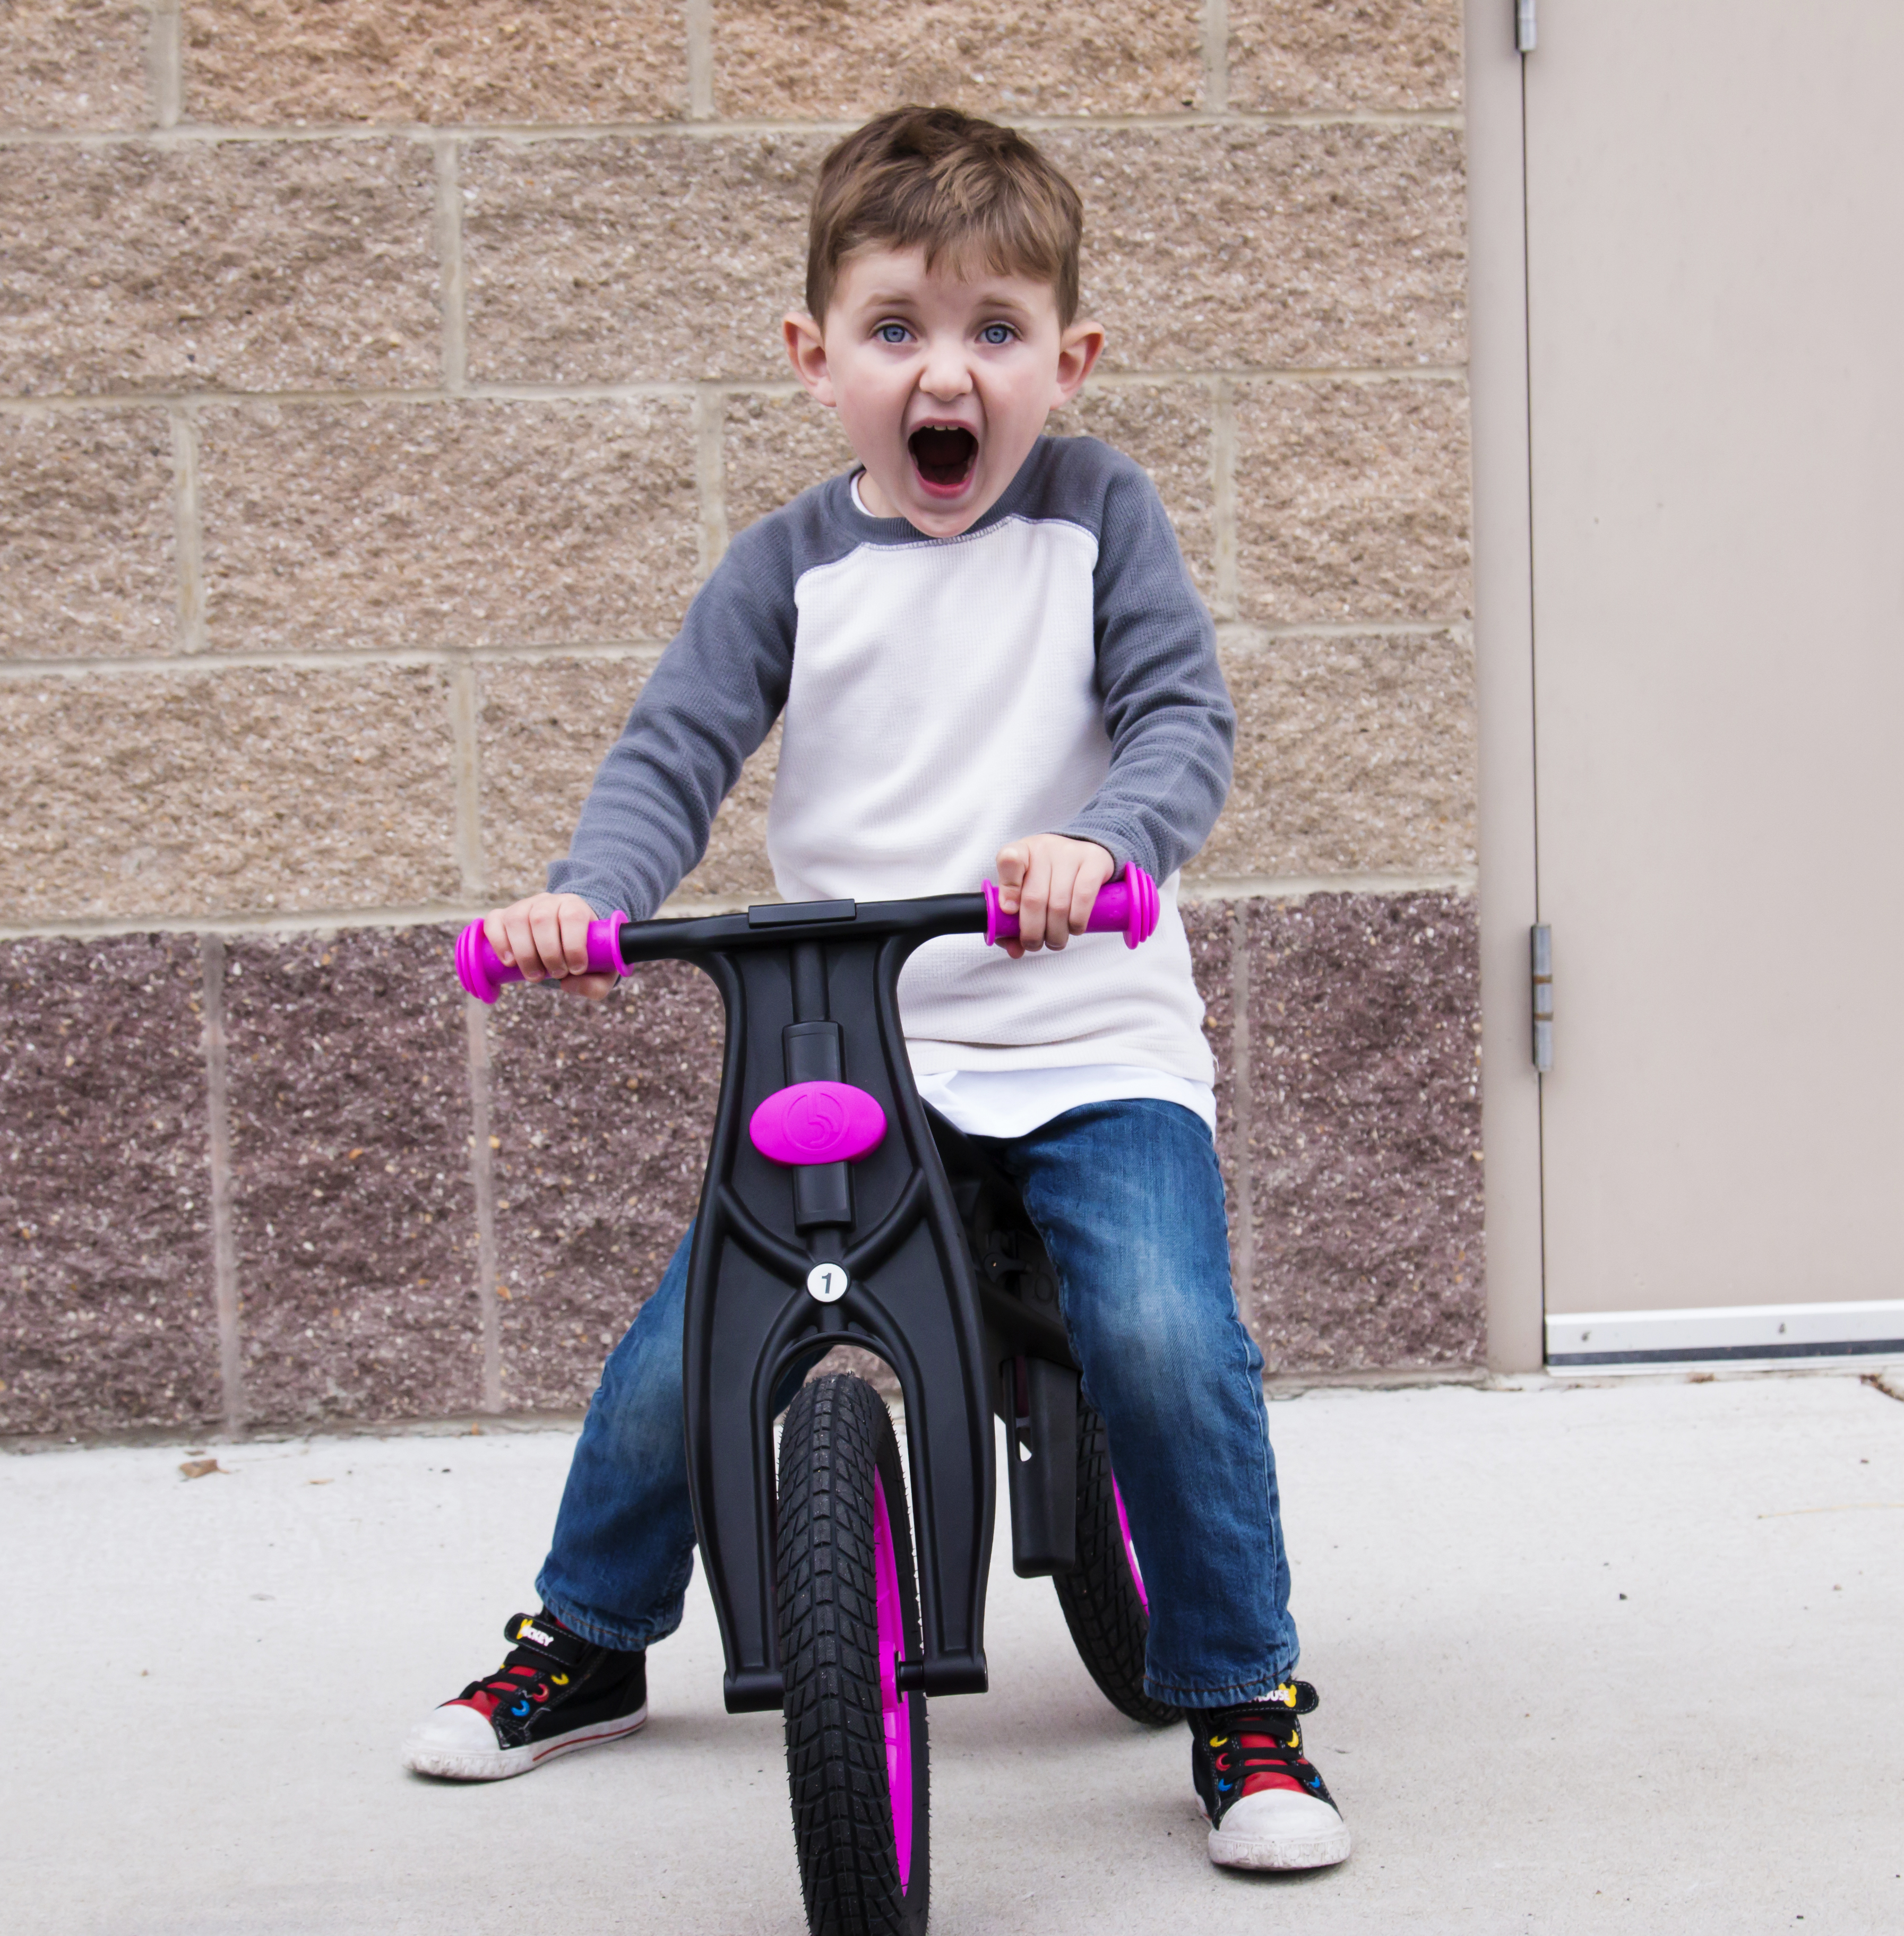 what age is a balance bike good for